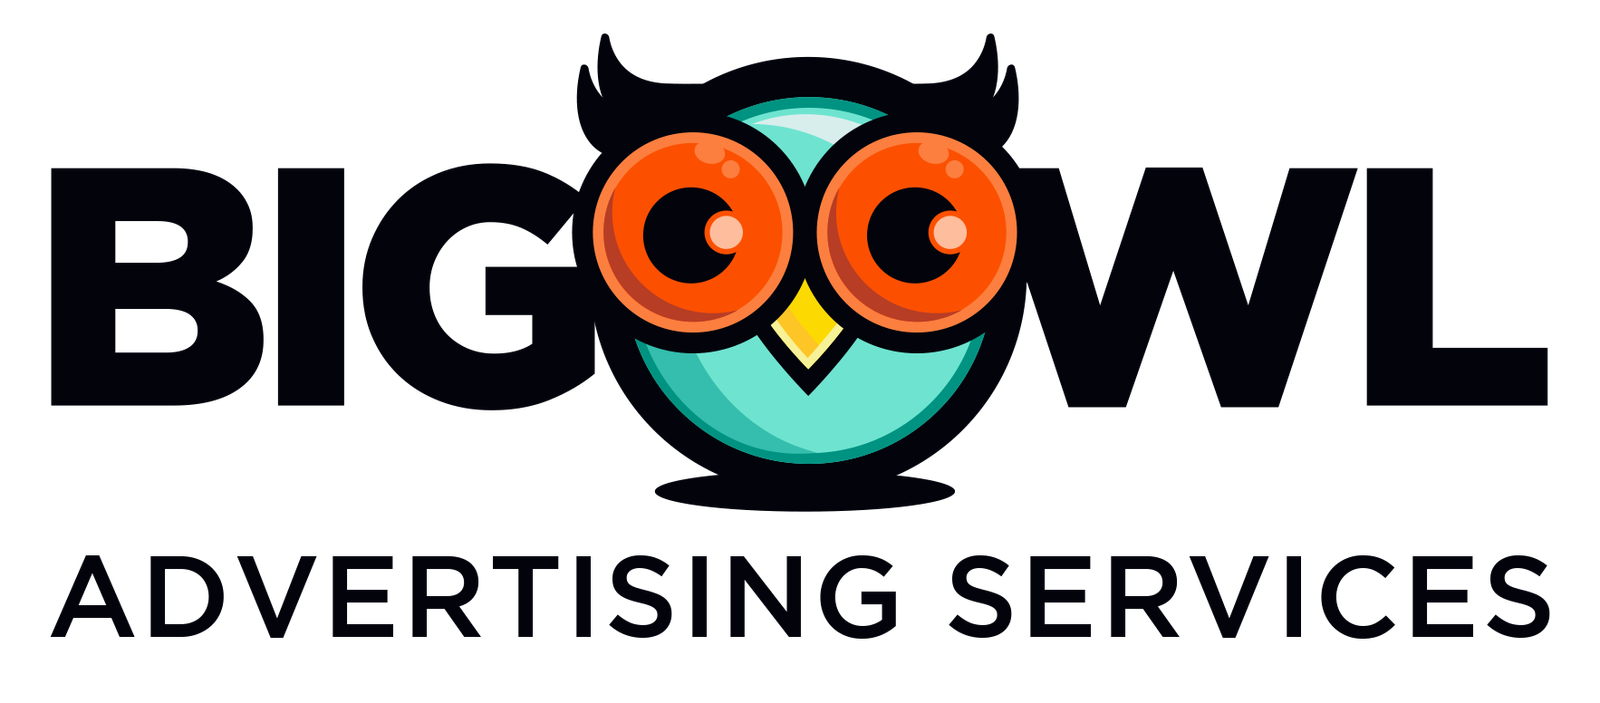 Big Owl Advertising Services